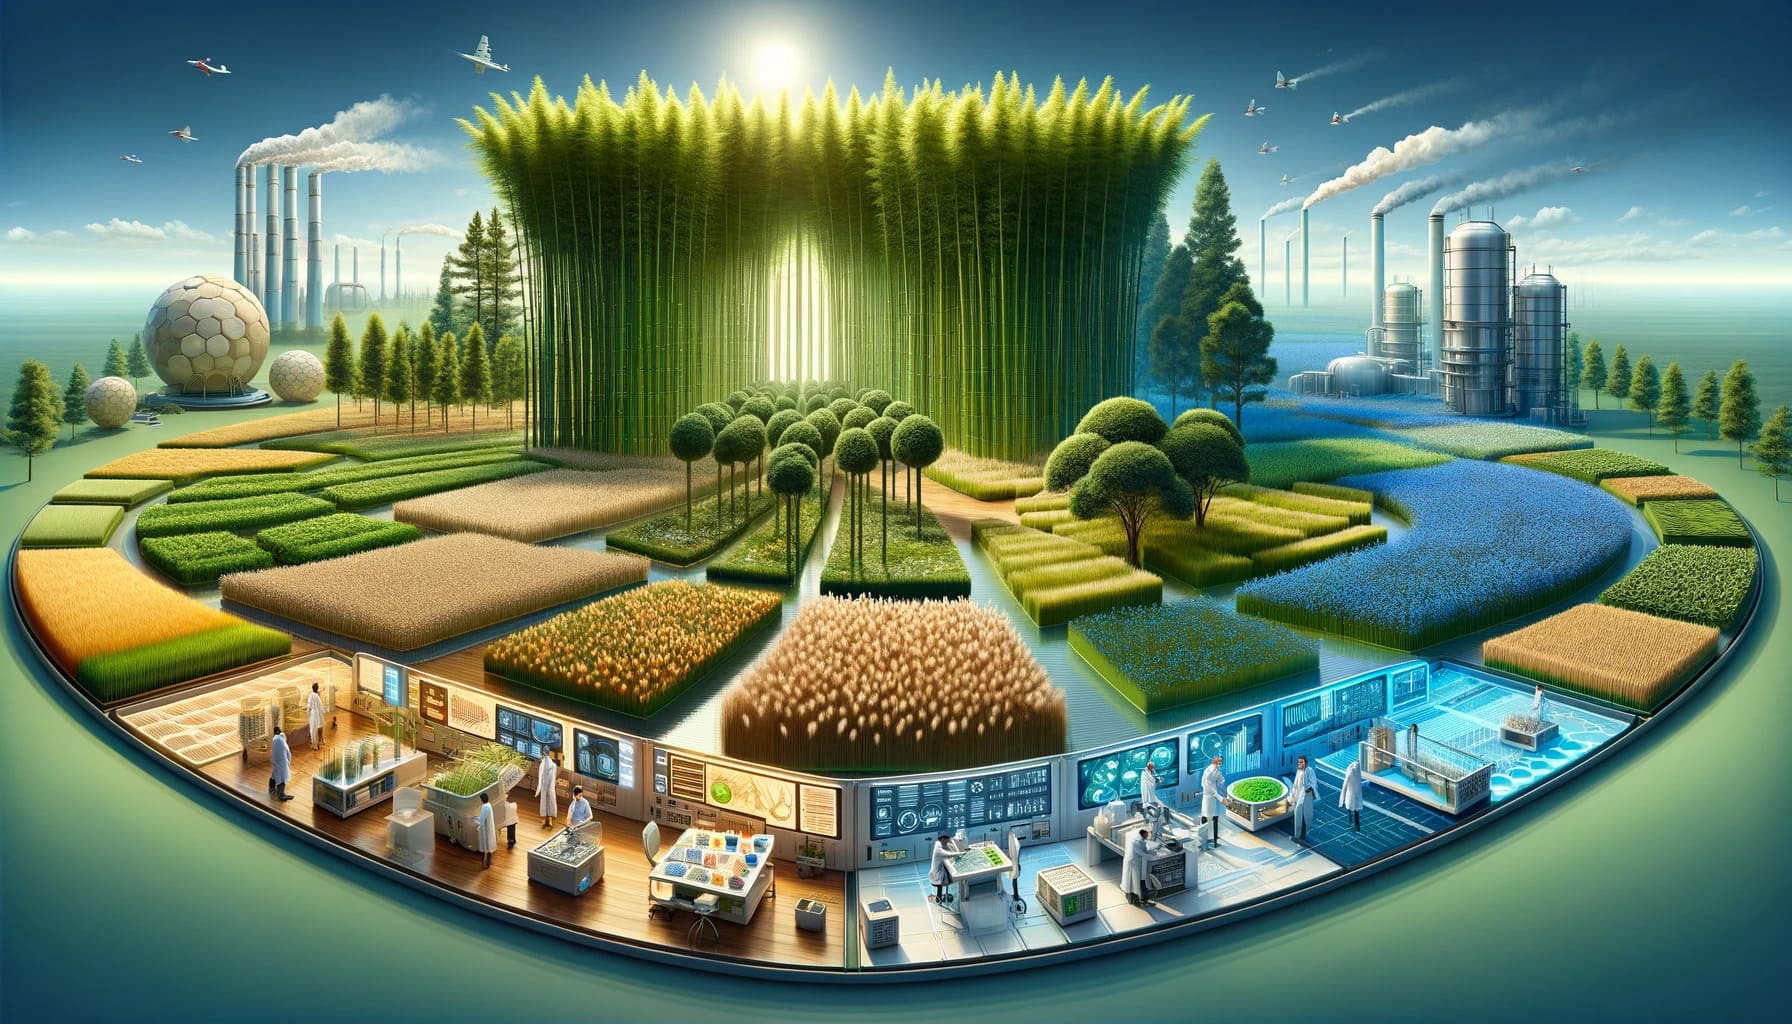 various sources of bio based resources. The scene is divided into different sections each illustrating a different bio b